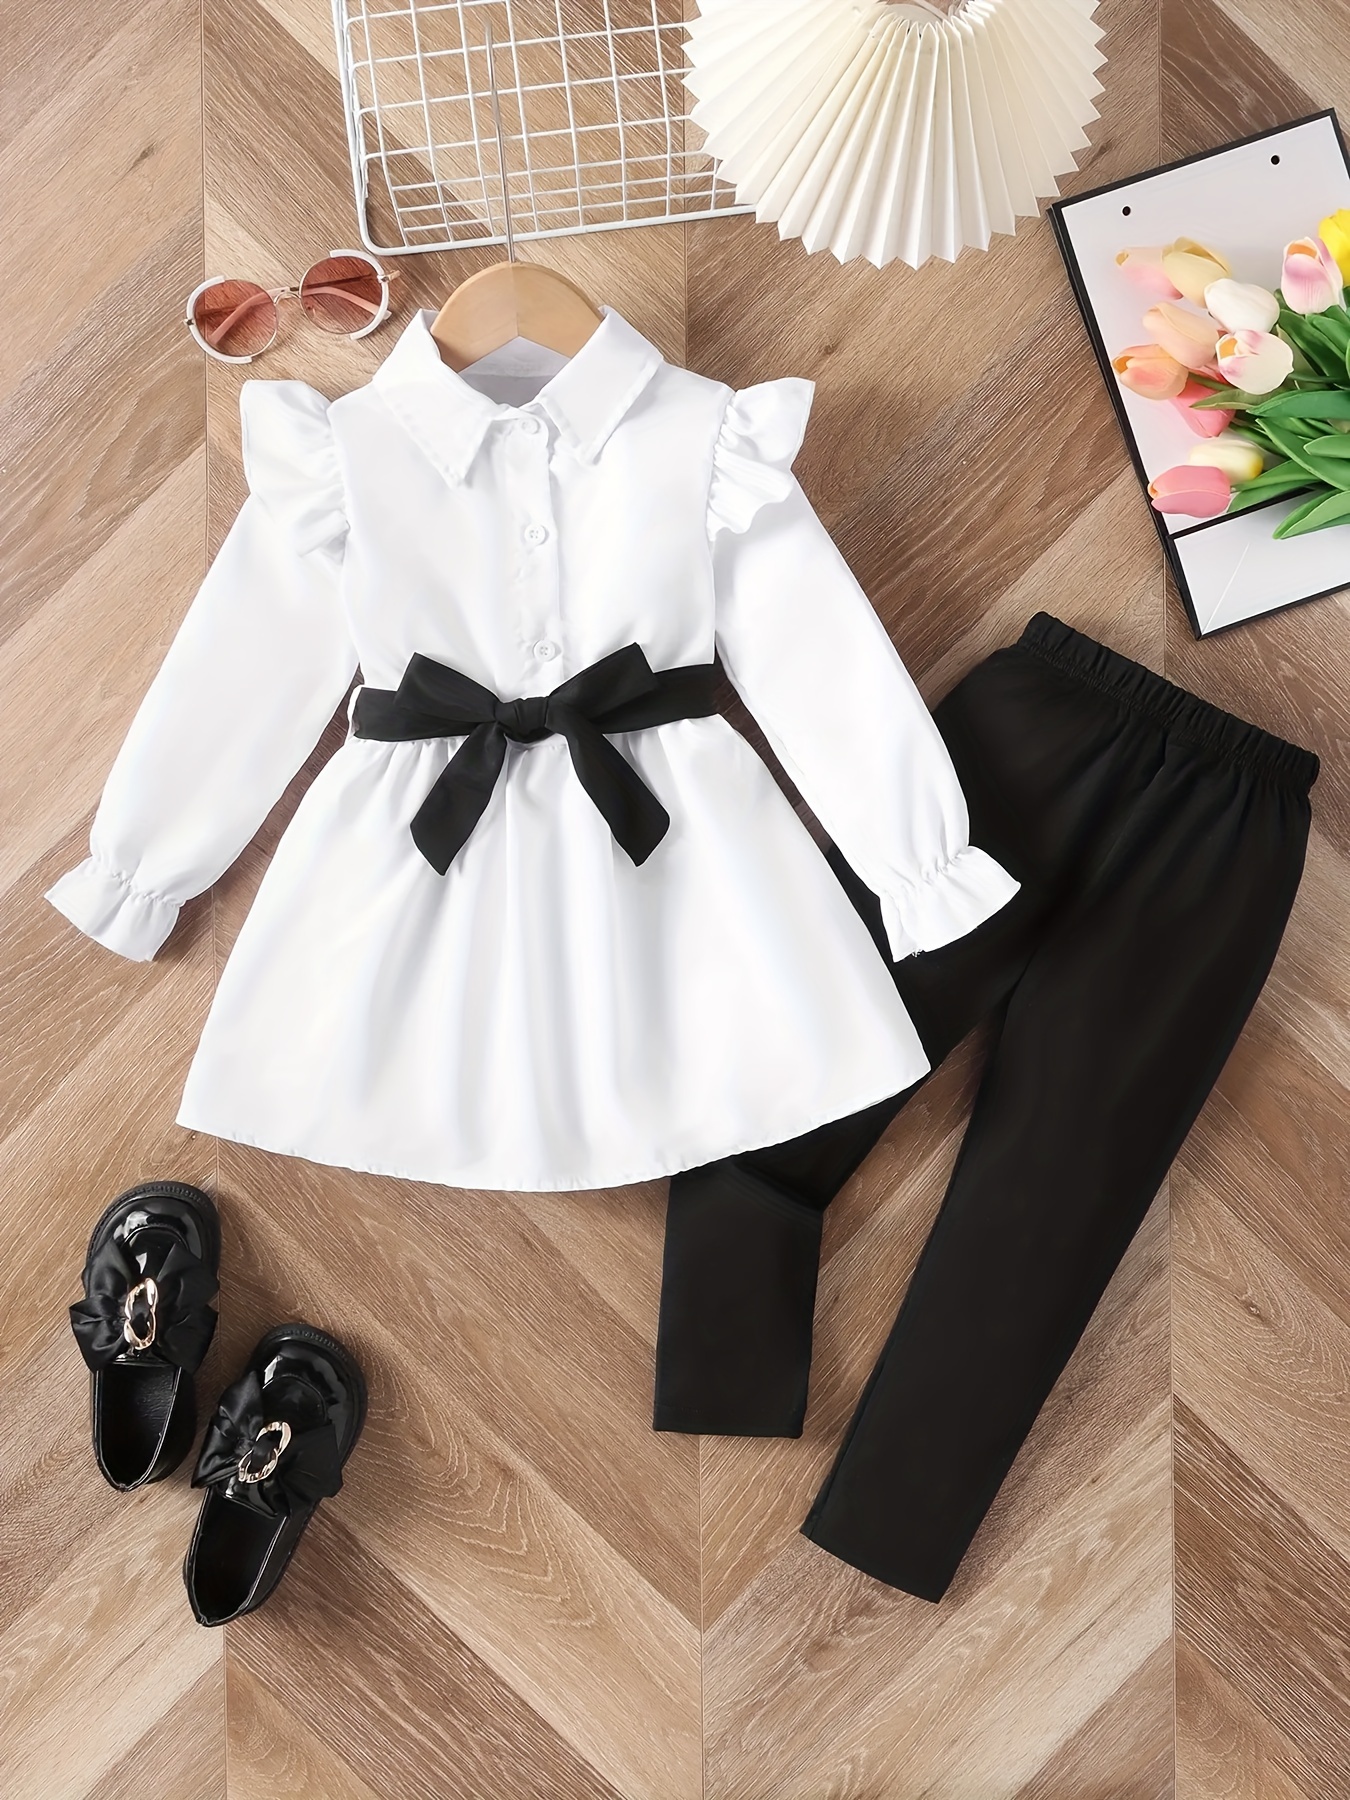 White Shirt with Black Pants Casual Spring Outfits For Women (10